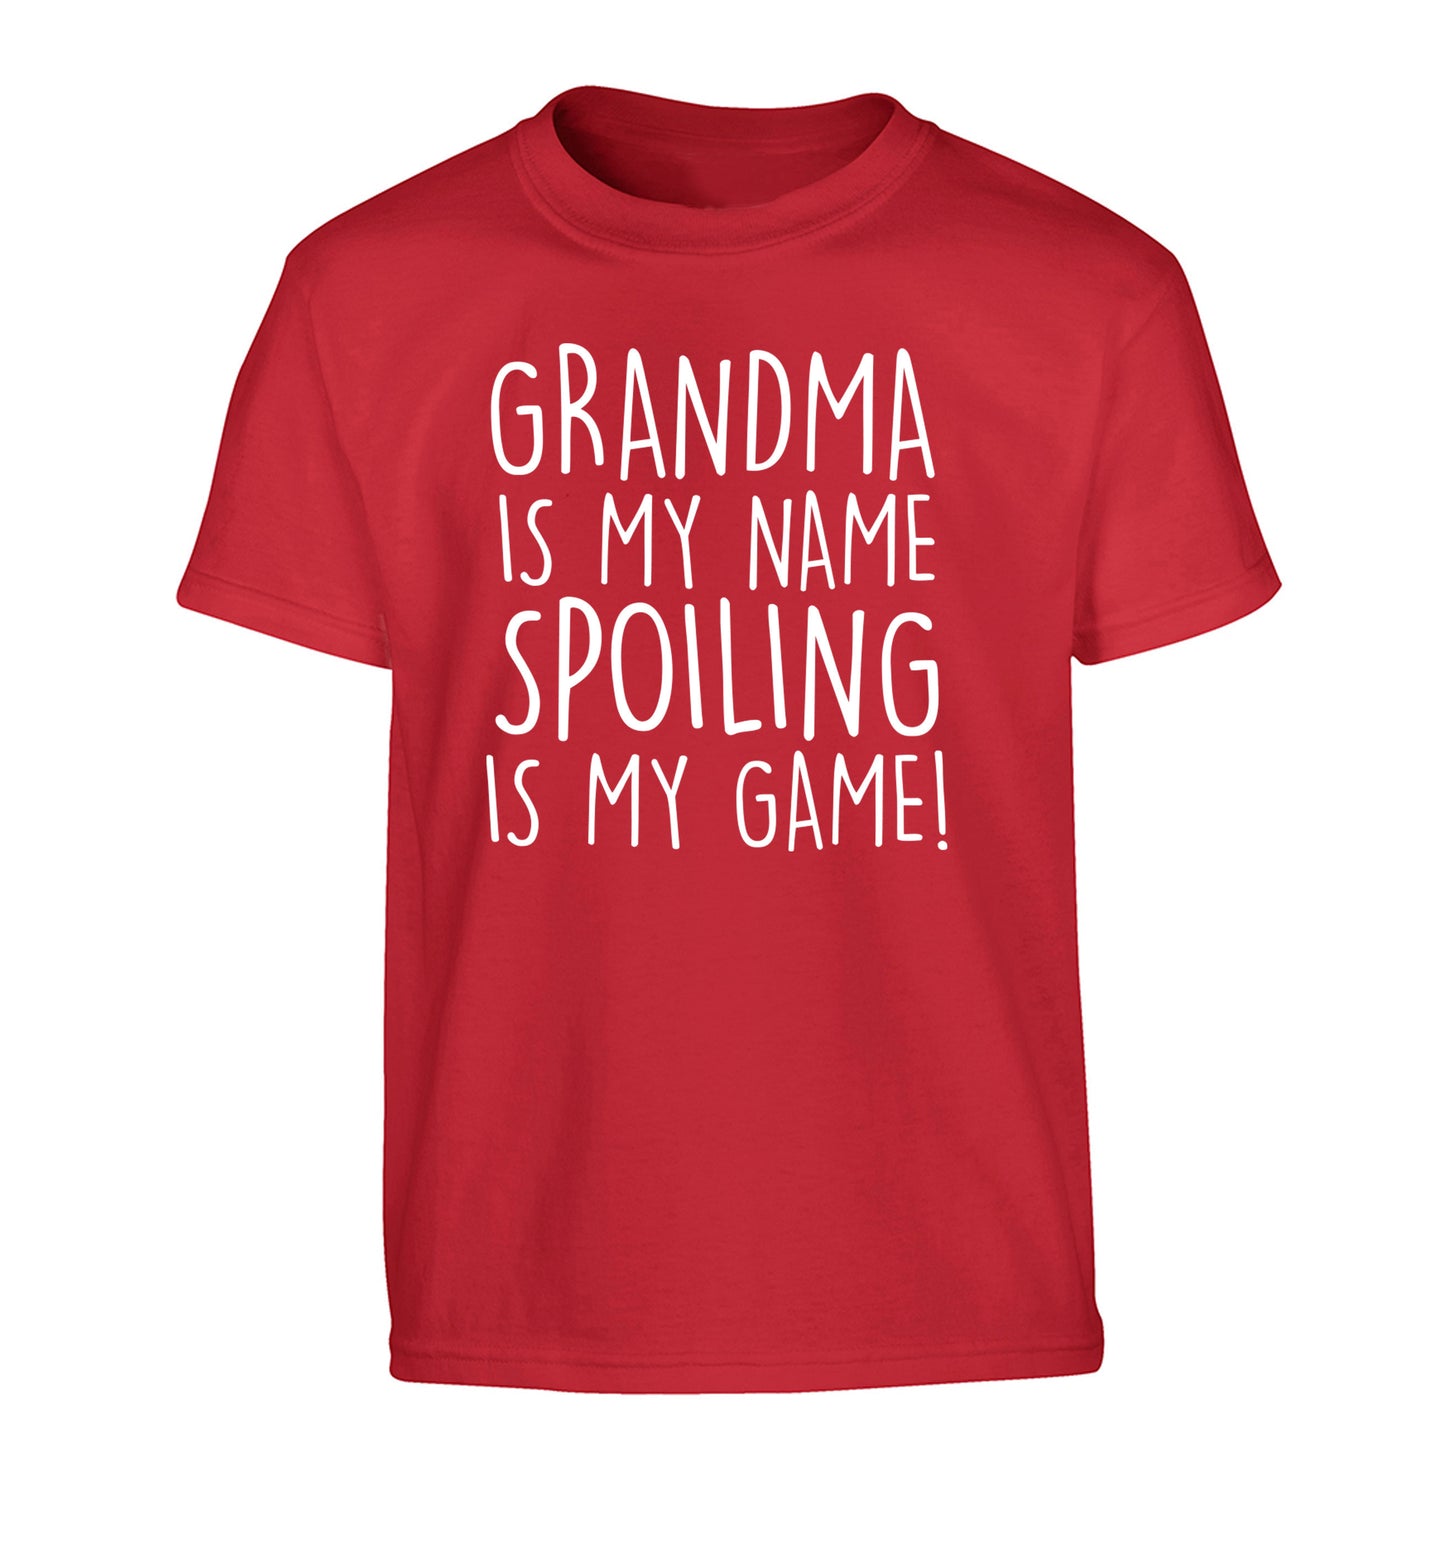 Grandma is my name, spoiling is my game Children's red Tshirt 12-14 Years